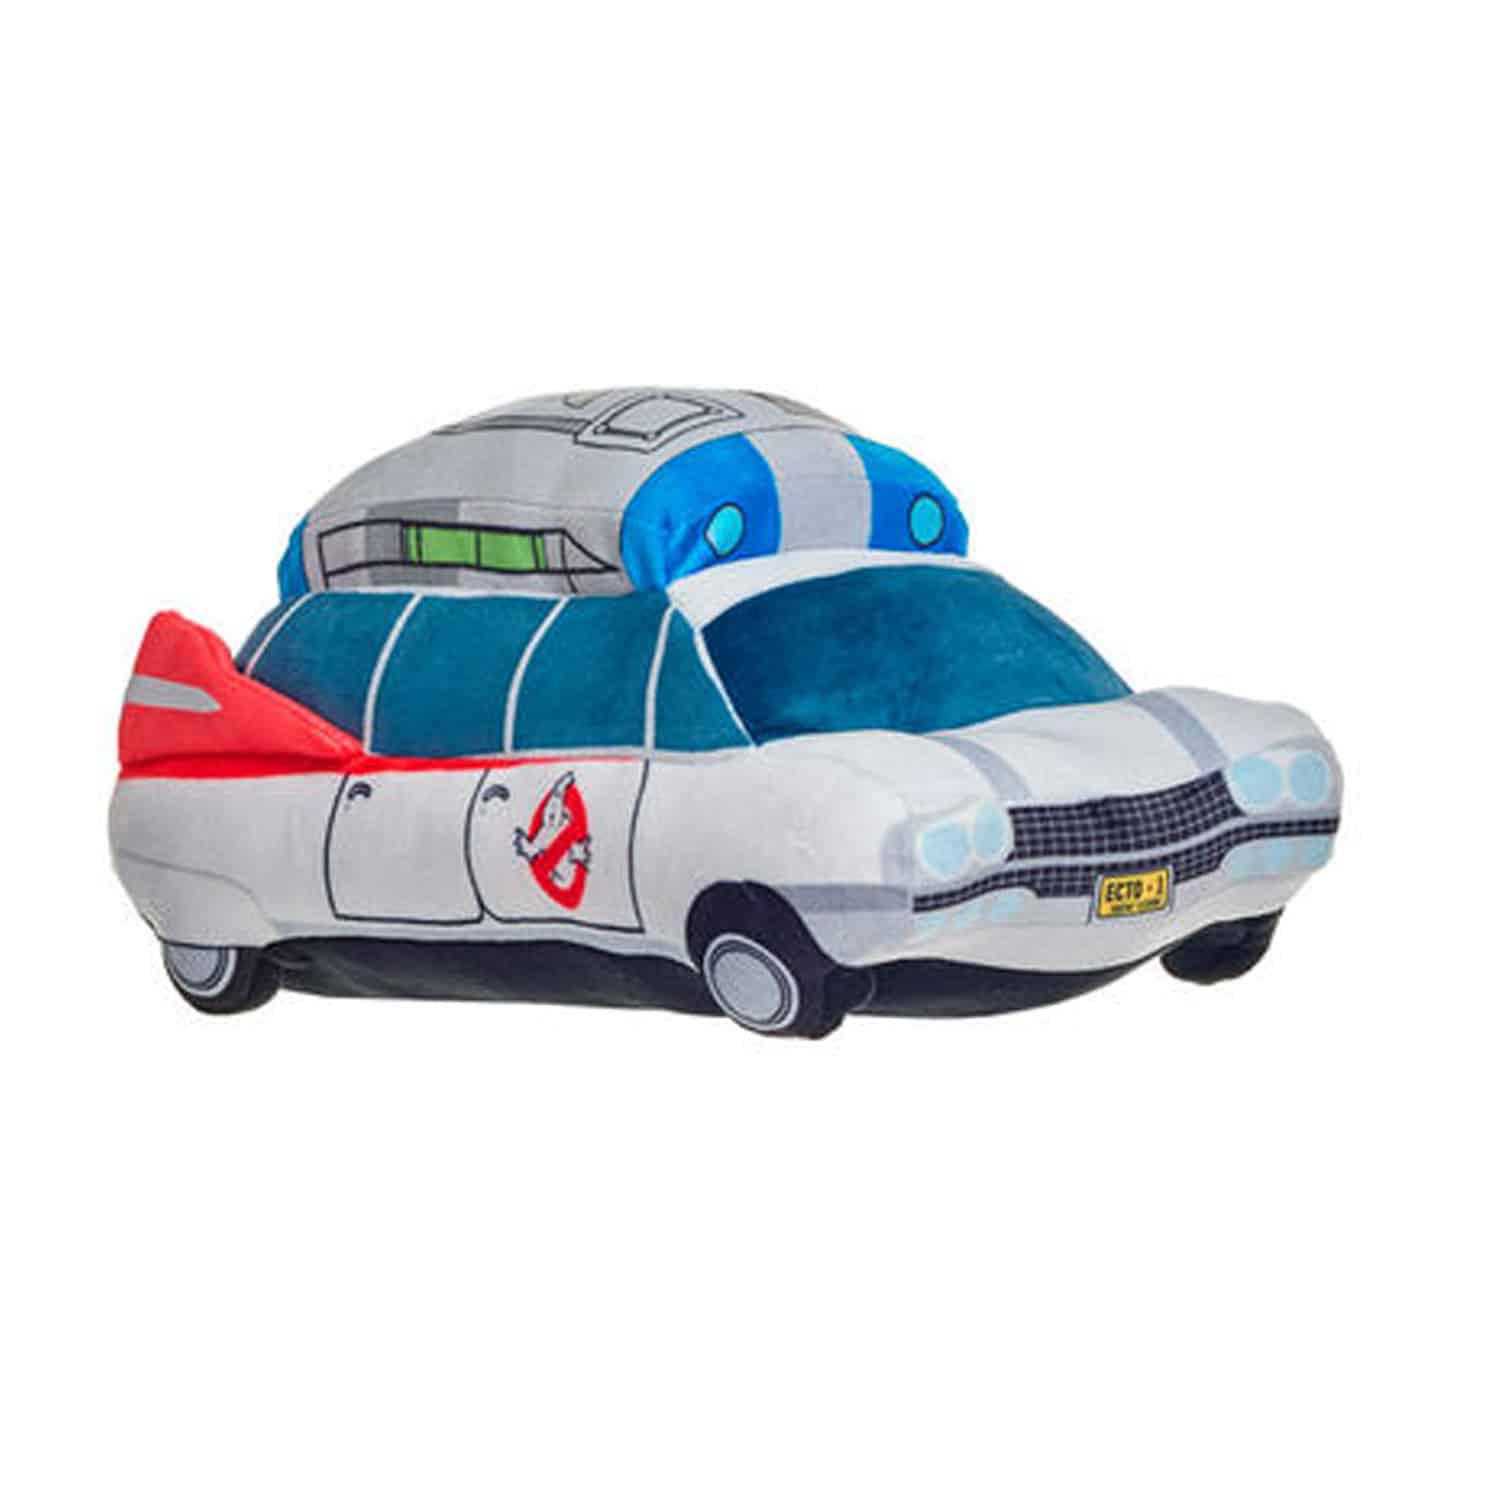 Ghostbusters - ECTO-1 Plush Toy